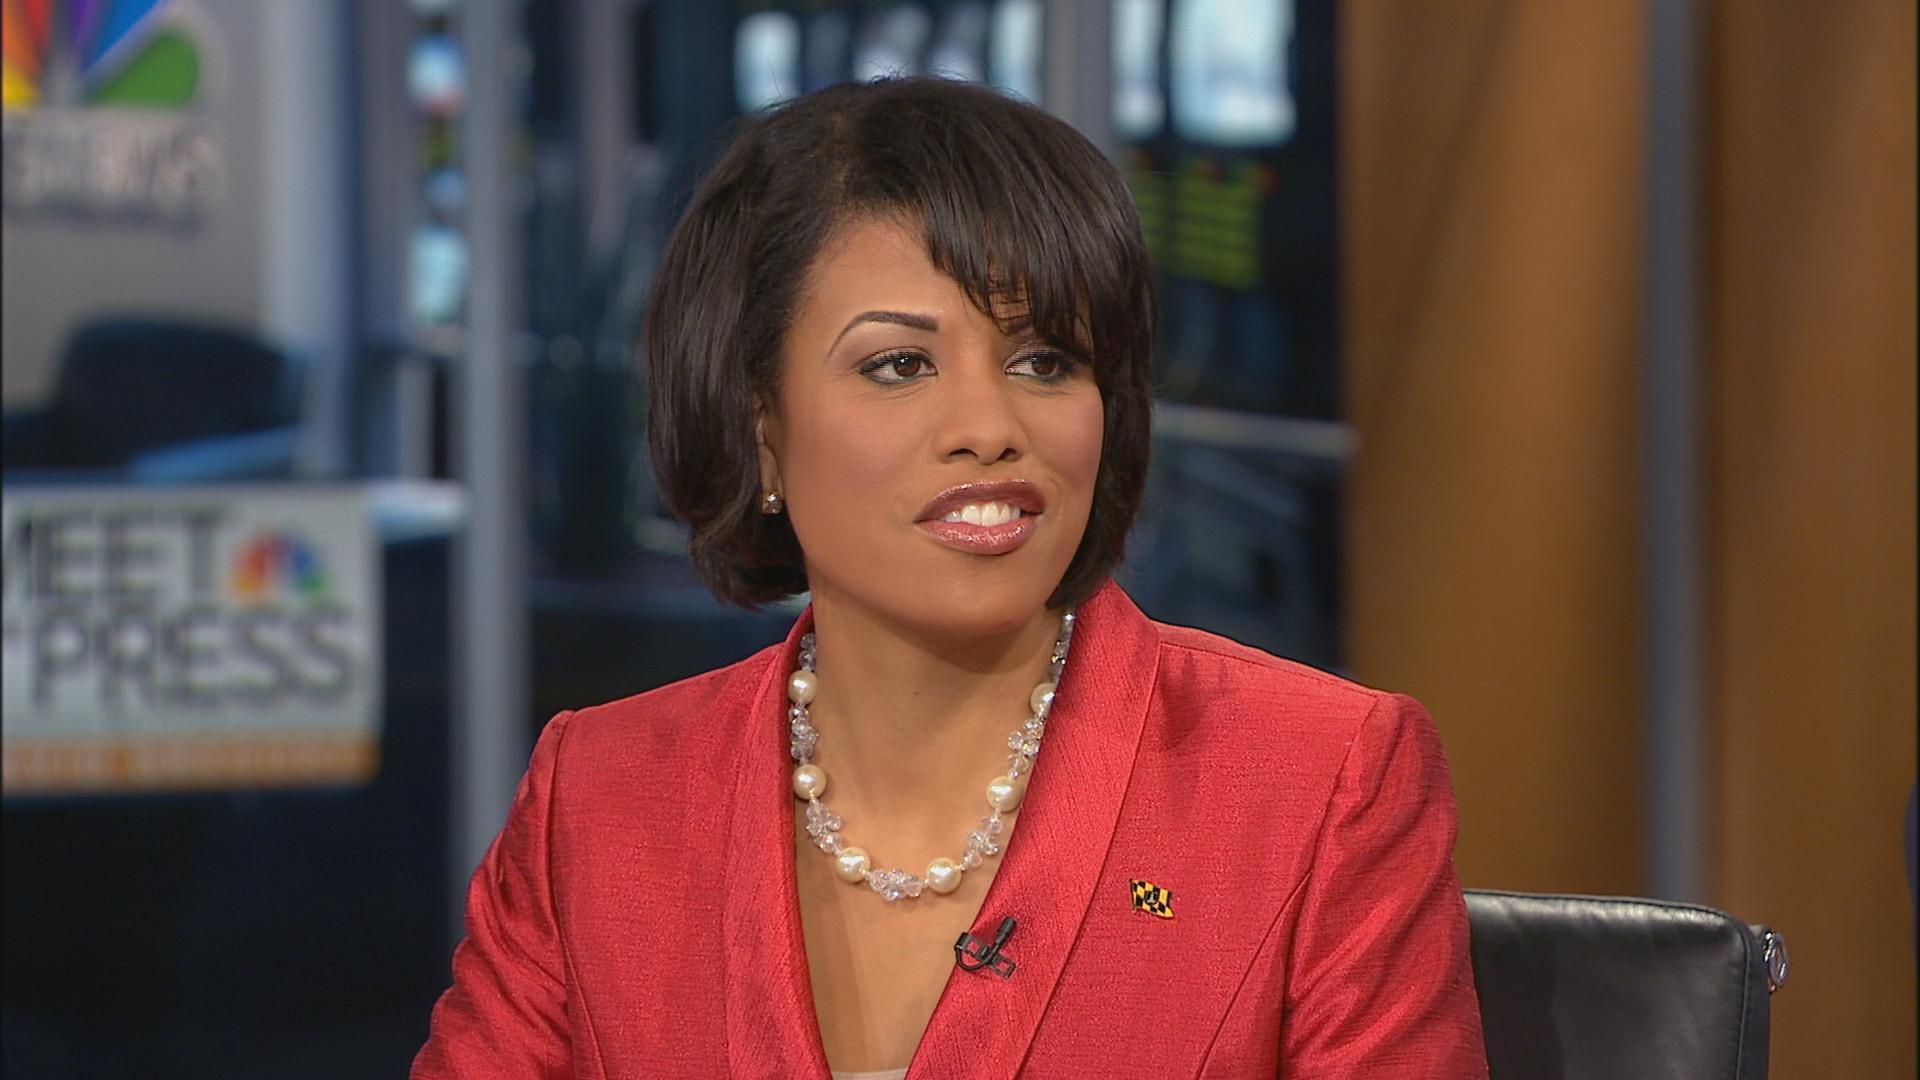 Stephanie Rawlings-Blake defends Obamacare on 'Meet the Press' - Baltimore Sun